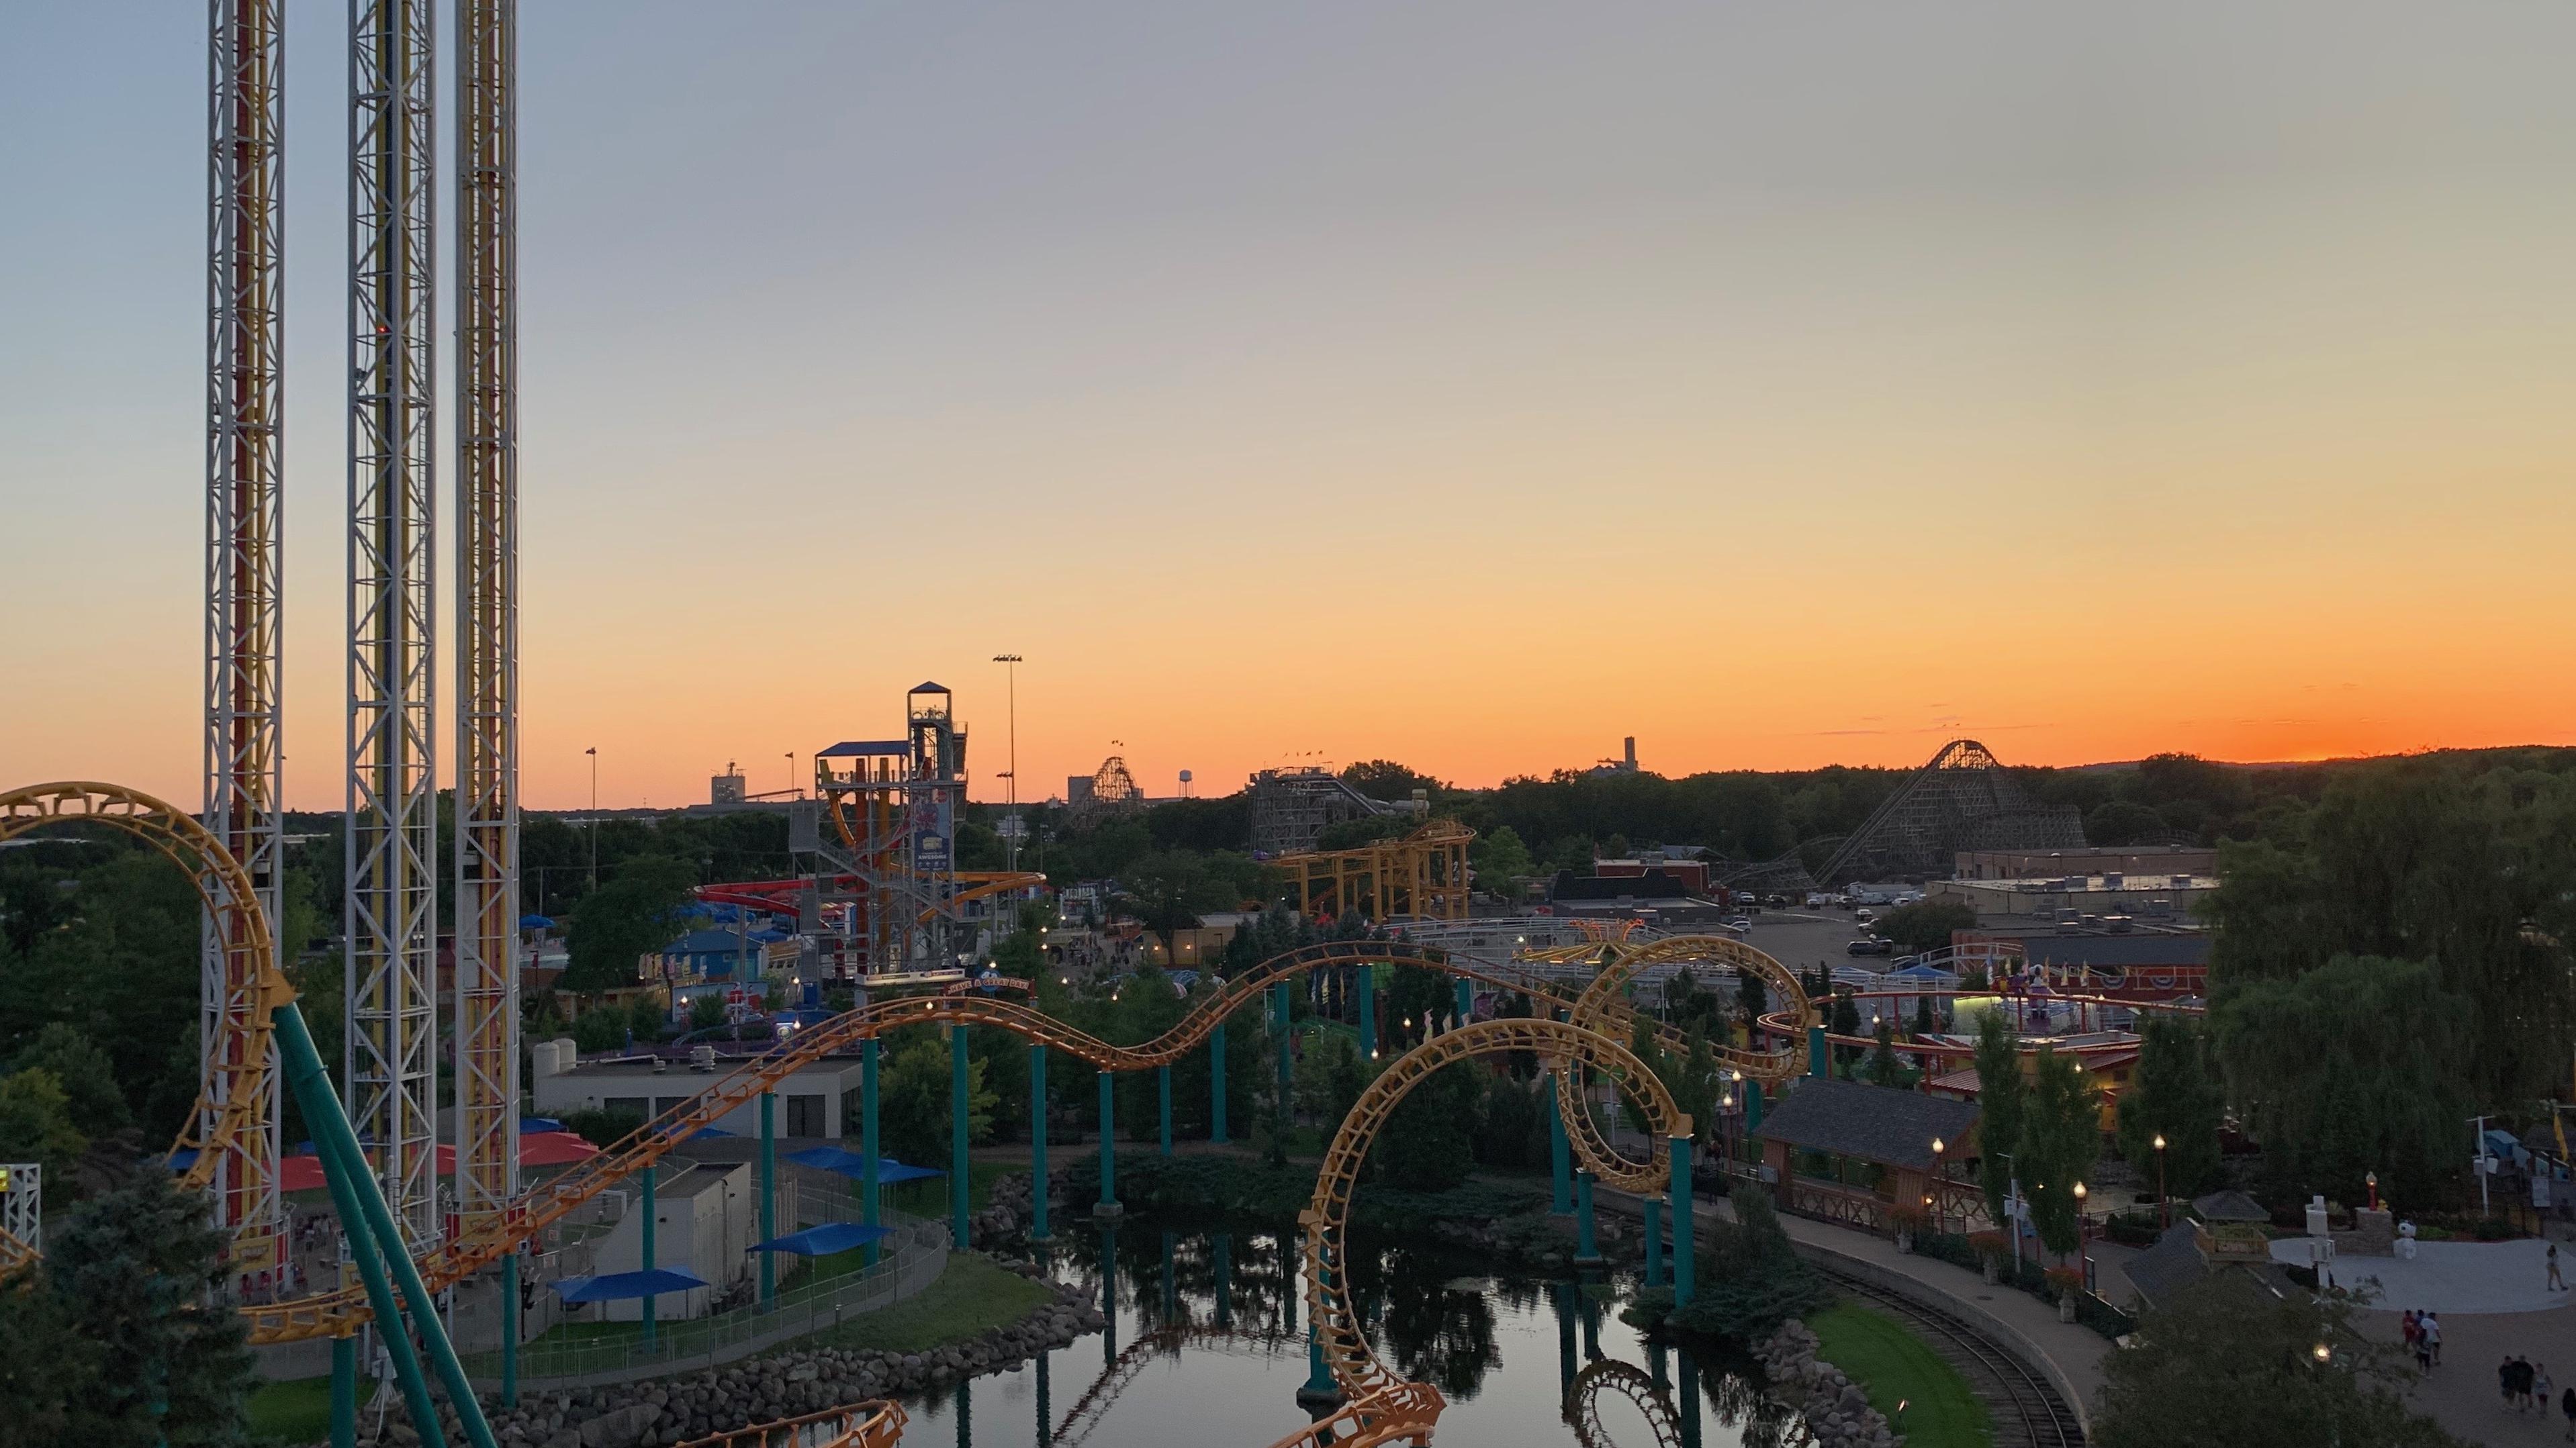 Photo of Sunset from the top of the Ferris Wheel at Valley Fair overlooking the theme park.